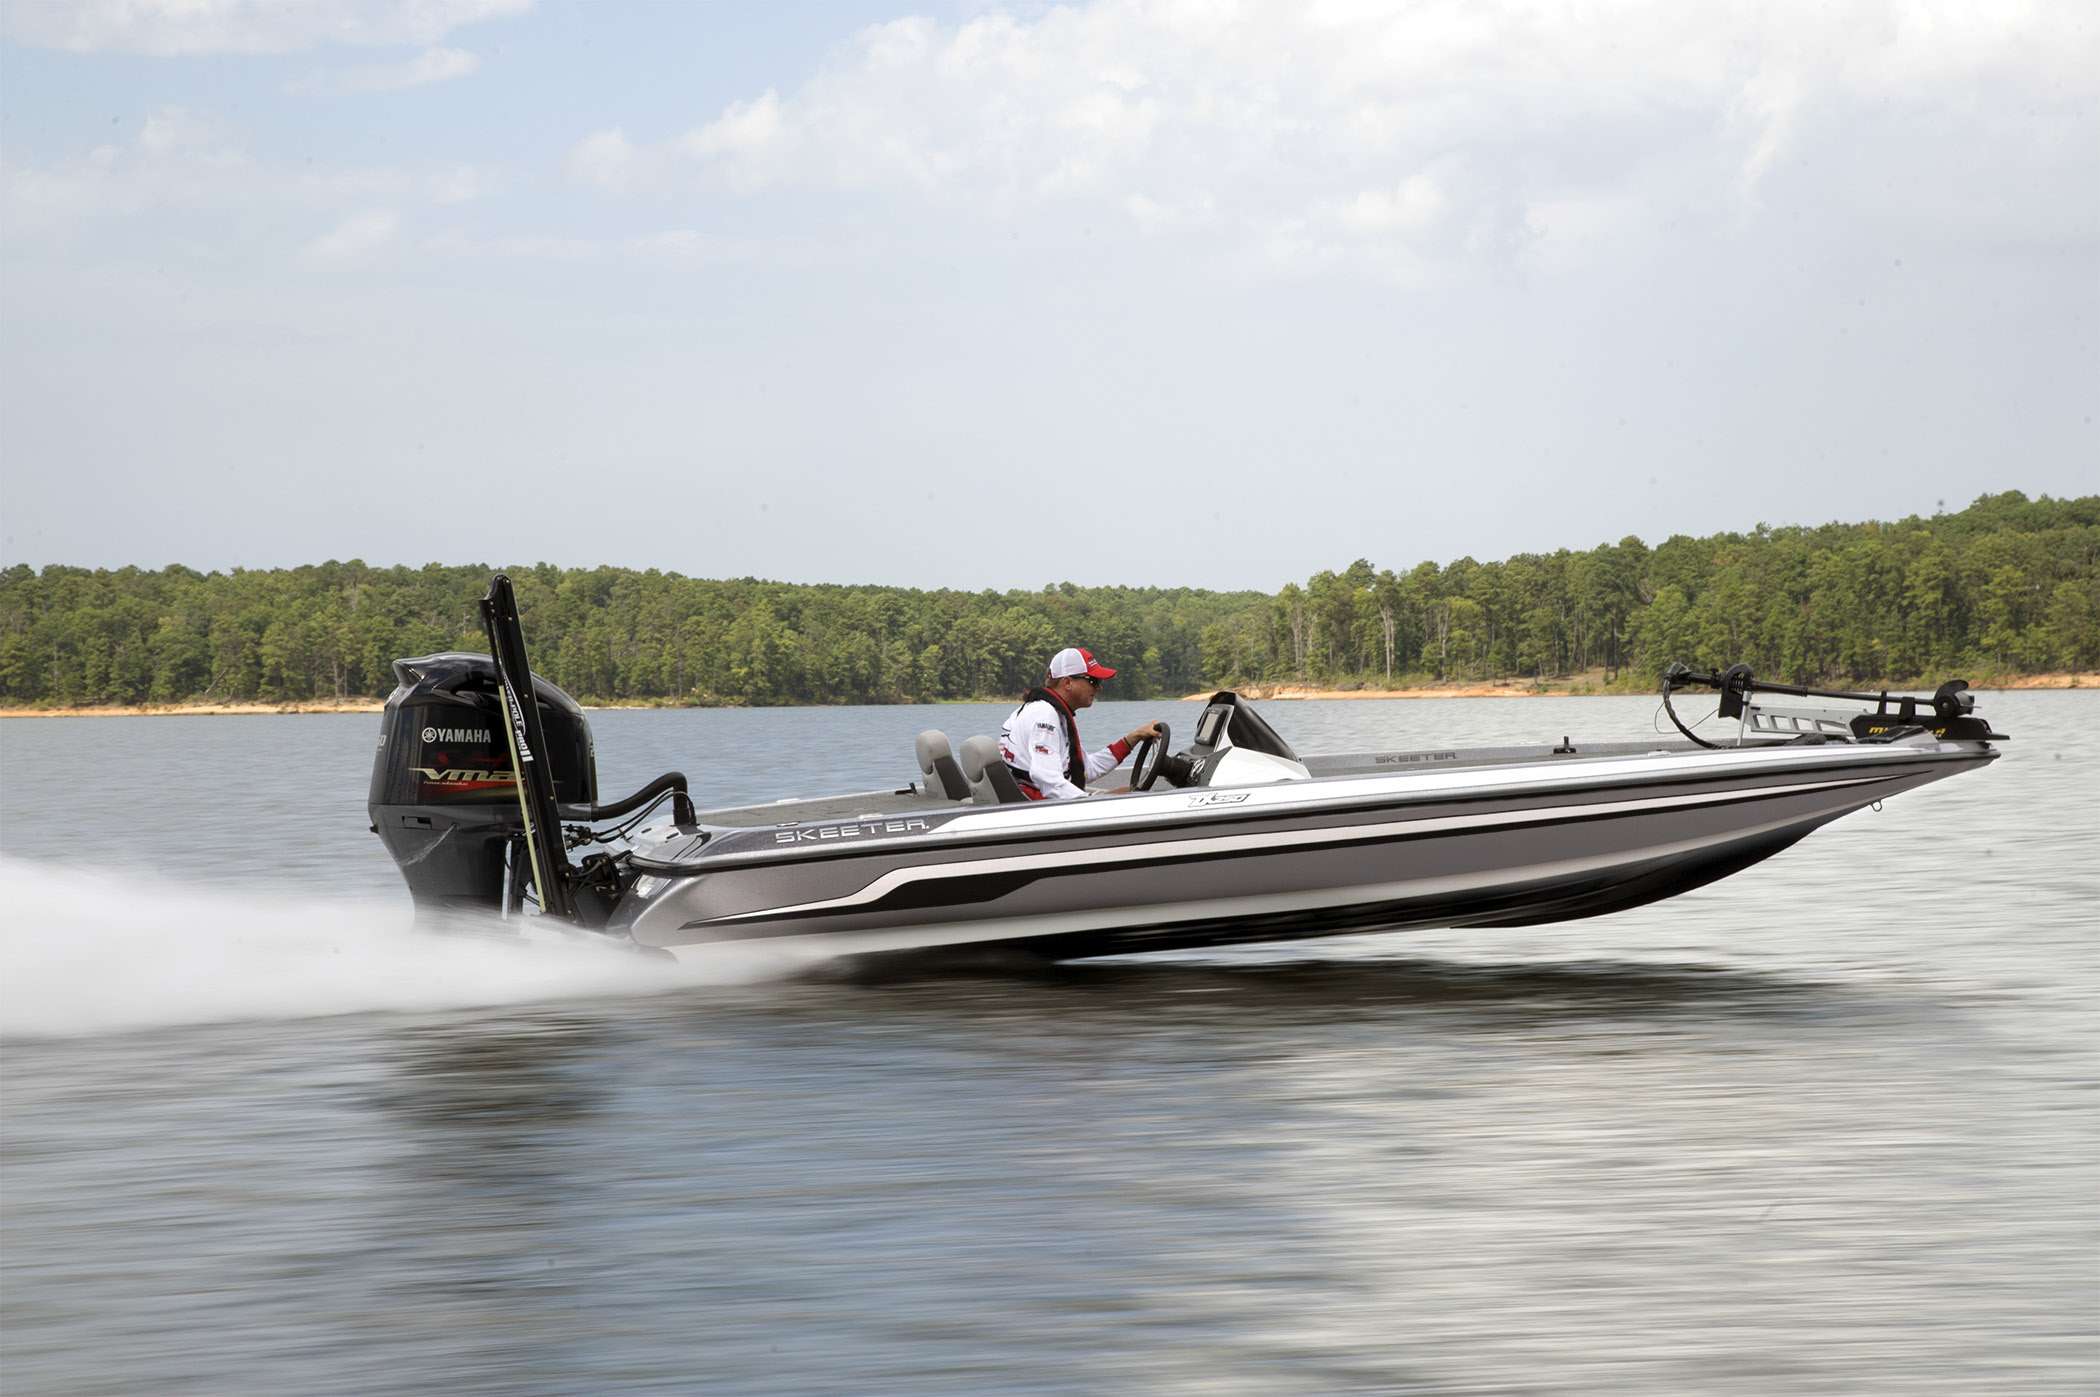 <B>SKEETER ZX225</b>
If you want to be tournament ready the moment you pull your boat from the dealership, this may be the rig for you. This package starts with a 20-foot ZX hull and Yamaha VF225 outboard. Plus, you get two Lowrance HDS-9 Gen 2 touch units, an 8-foot Power-Pole, 112-pound-thrust Minn Kota Fortrex trolling motor and a dozen more high-Â­performance features that used to be big-dollar add-ons. You will roll out of the dealership ready to fish for $48,995. 